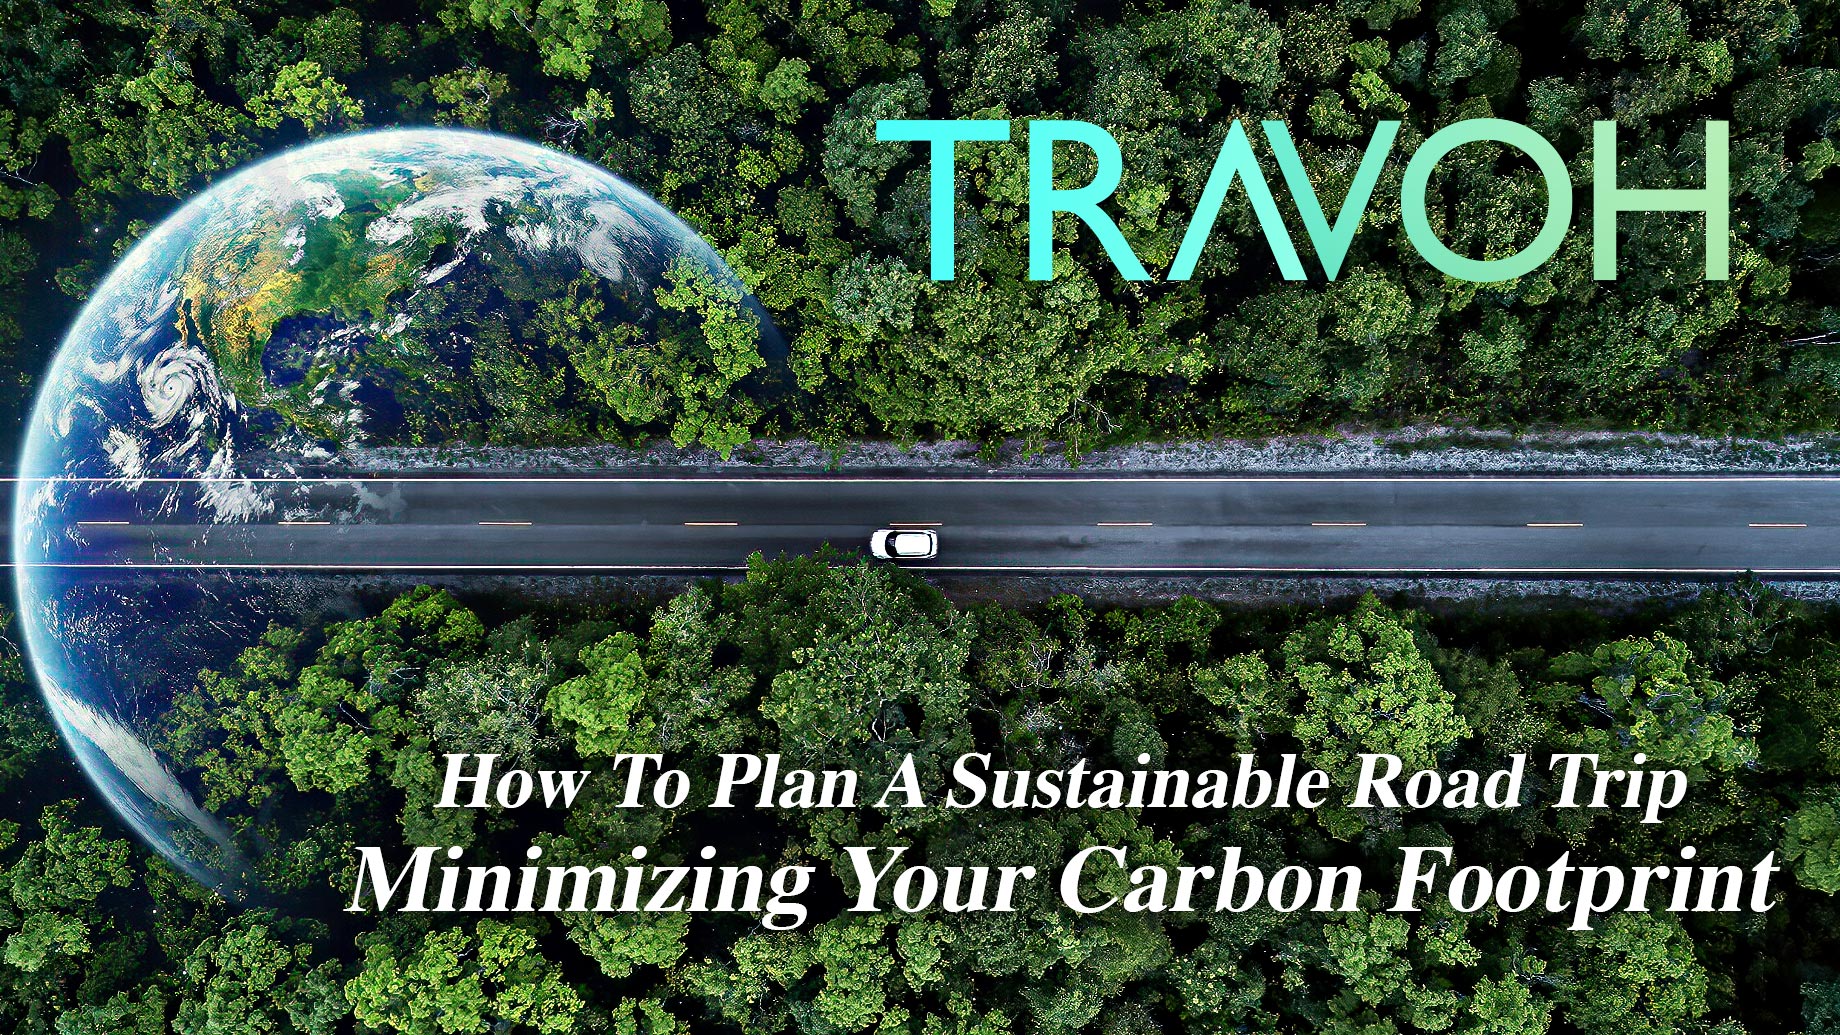 How To Plan A Sustainable Road Trip: Minimizing Your Carbon Footprint